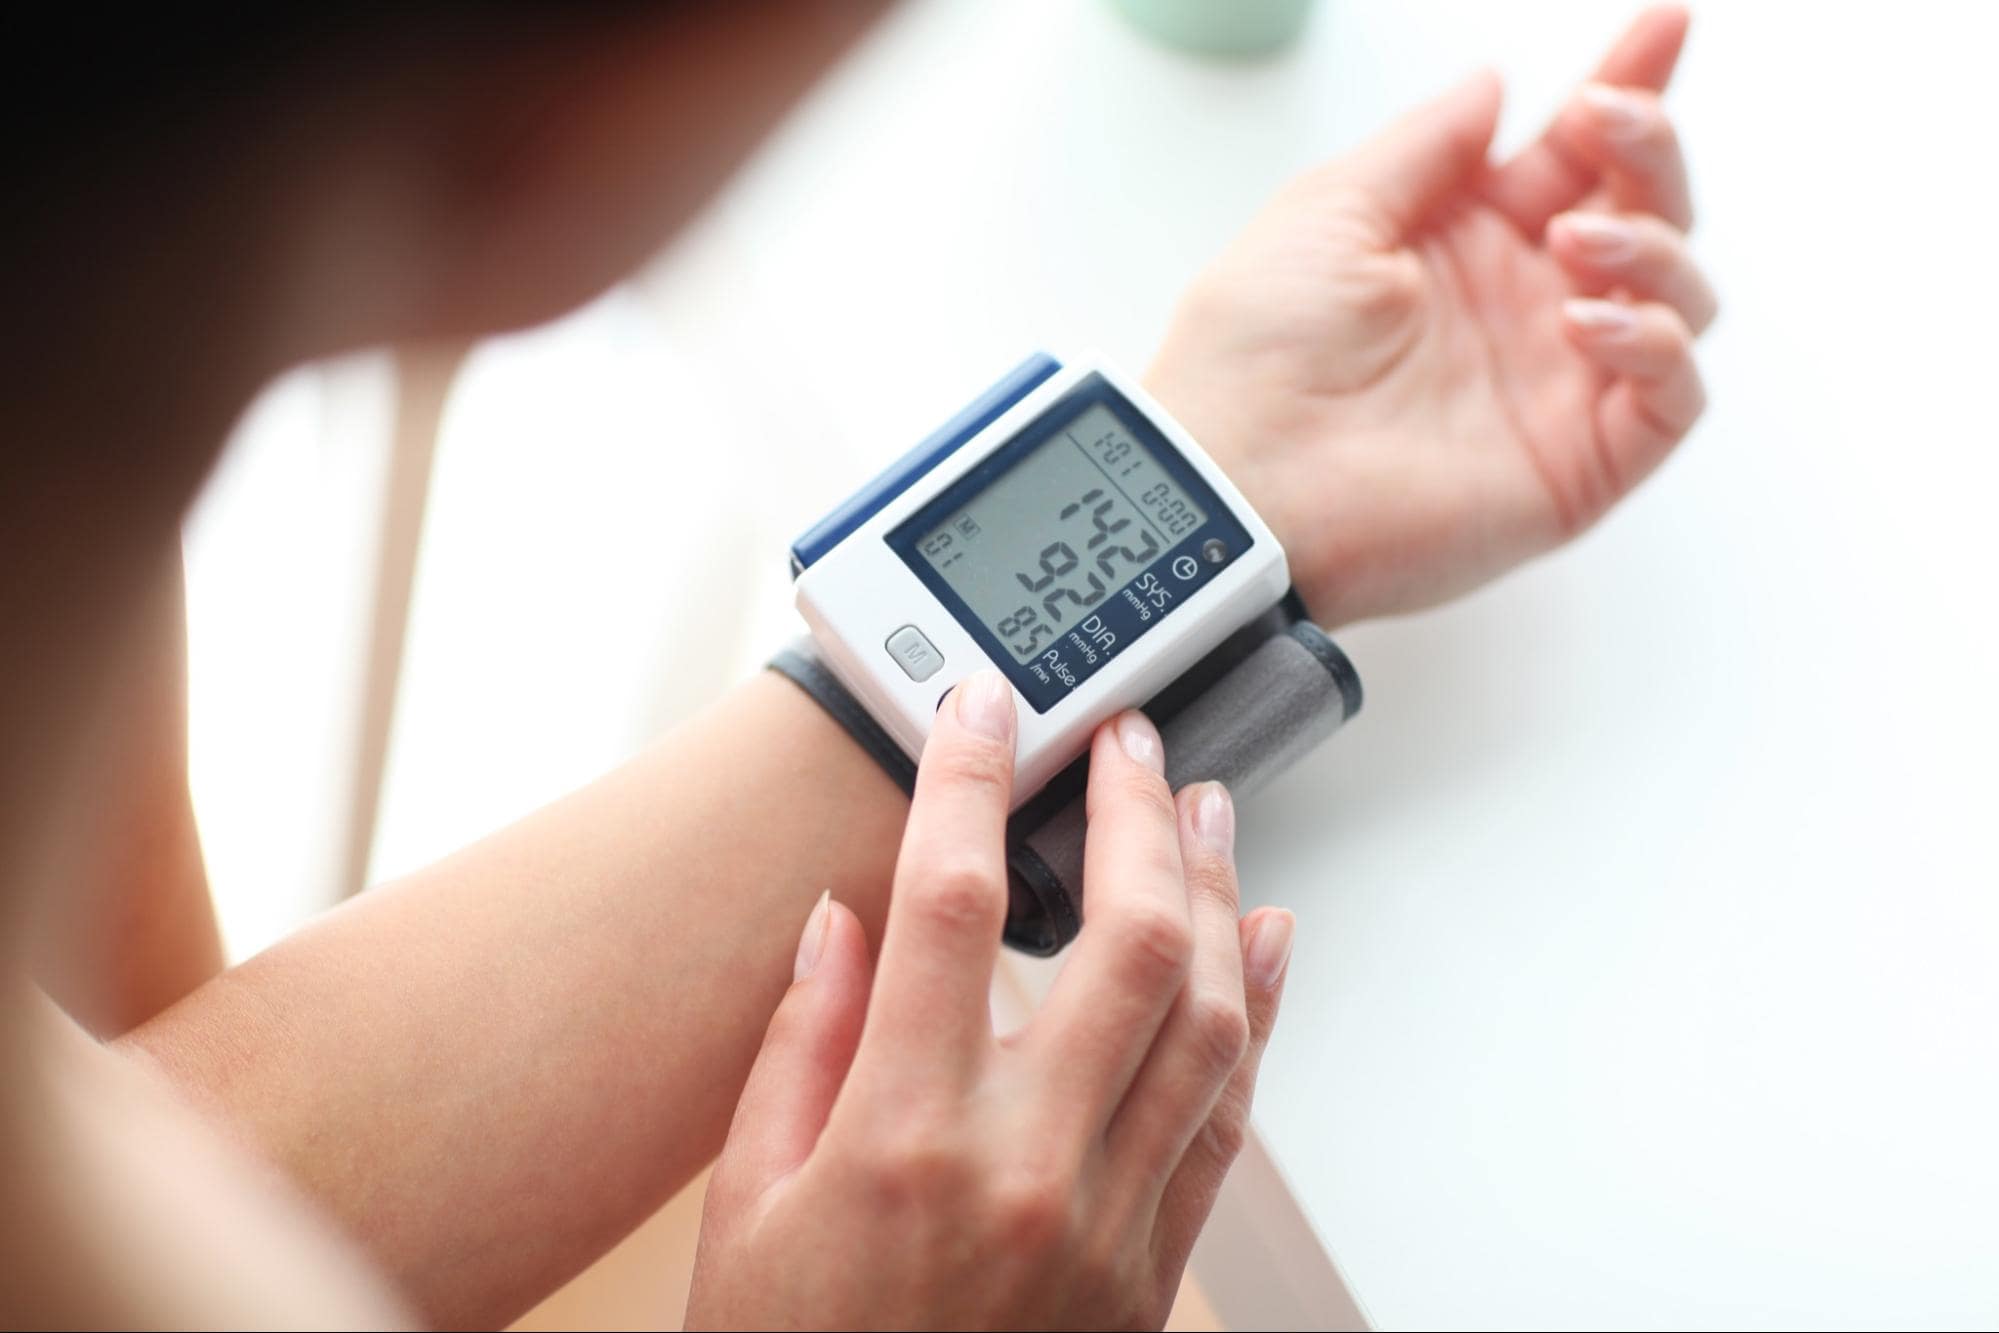 A woman adjusting a portable health monitor on her wrist.